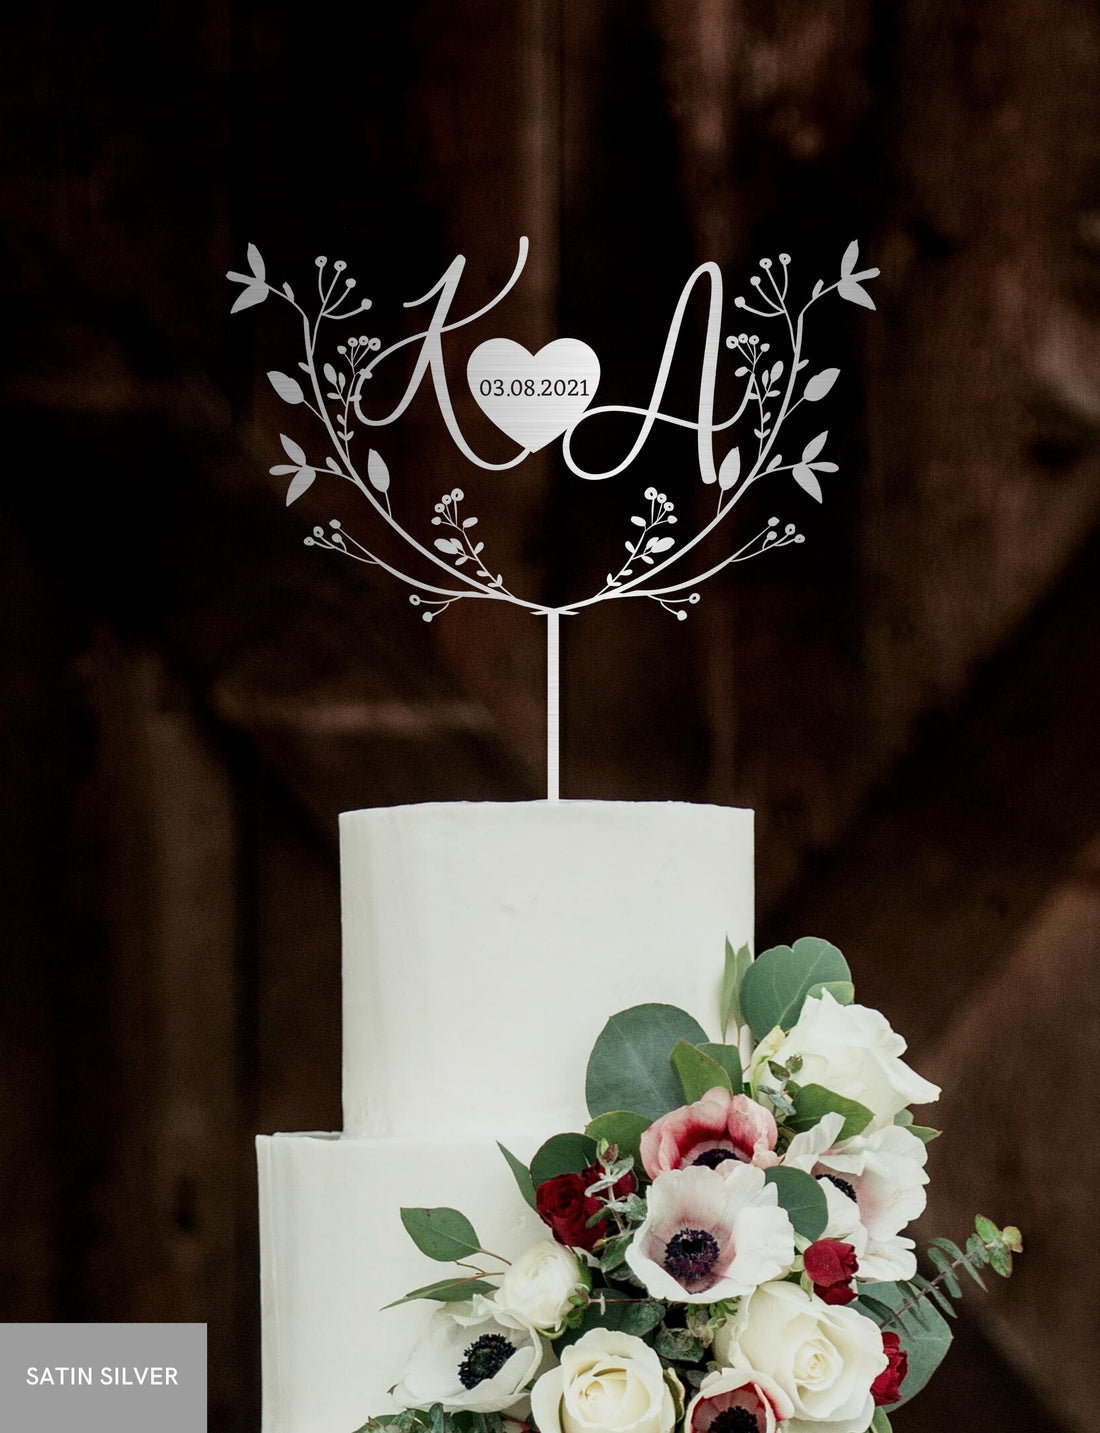 Personalised MDF/ Mirror Acrylic Wedding Cake Topper, Custom Join Name & Engraved Date on Heart, Leaf Signage, Bridal & Groom, Hens, Event Party Supply Decor